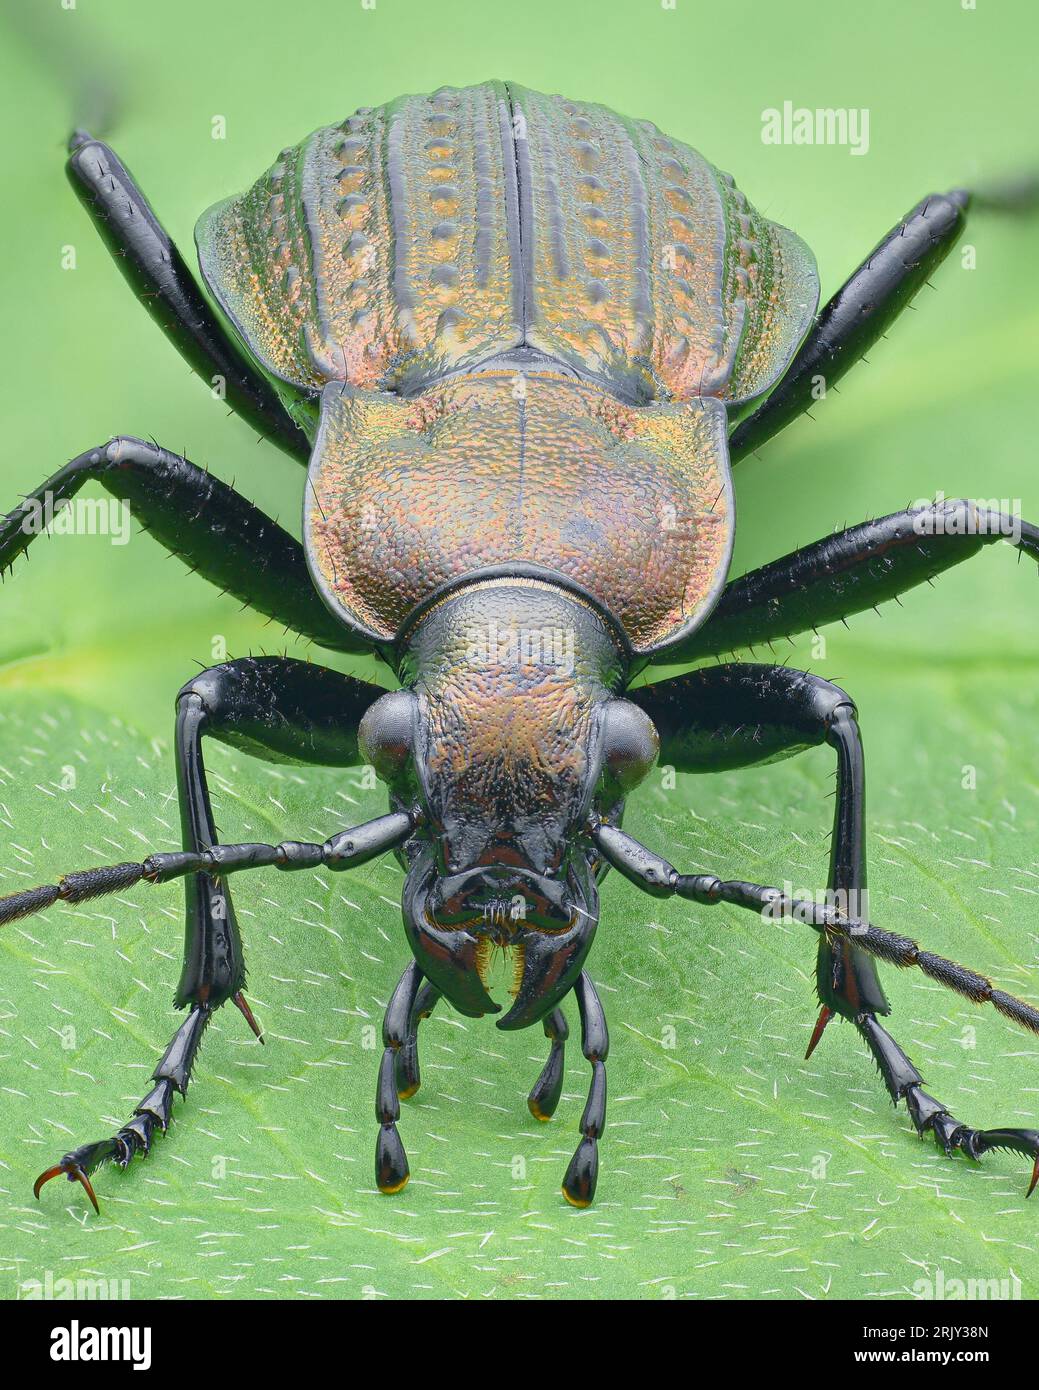 Portrait of a copper-coloured Ground beetle with granulated elytra, standing on a green leaf (Granulated Ground Beetle, Carabus granulatus) Stock Photo